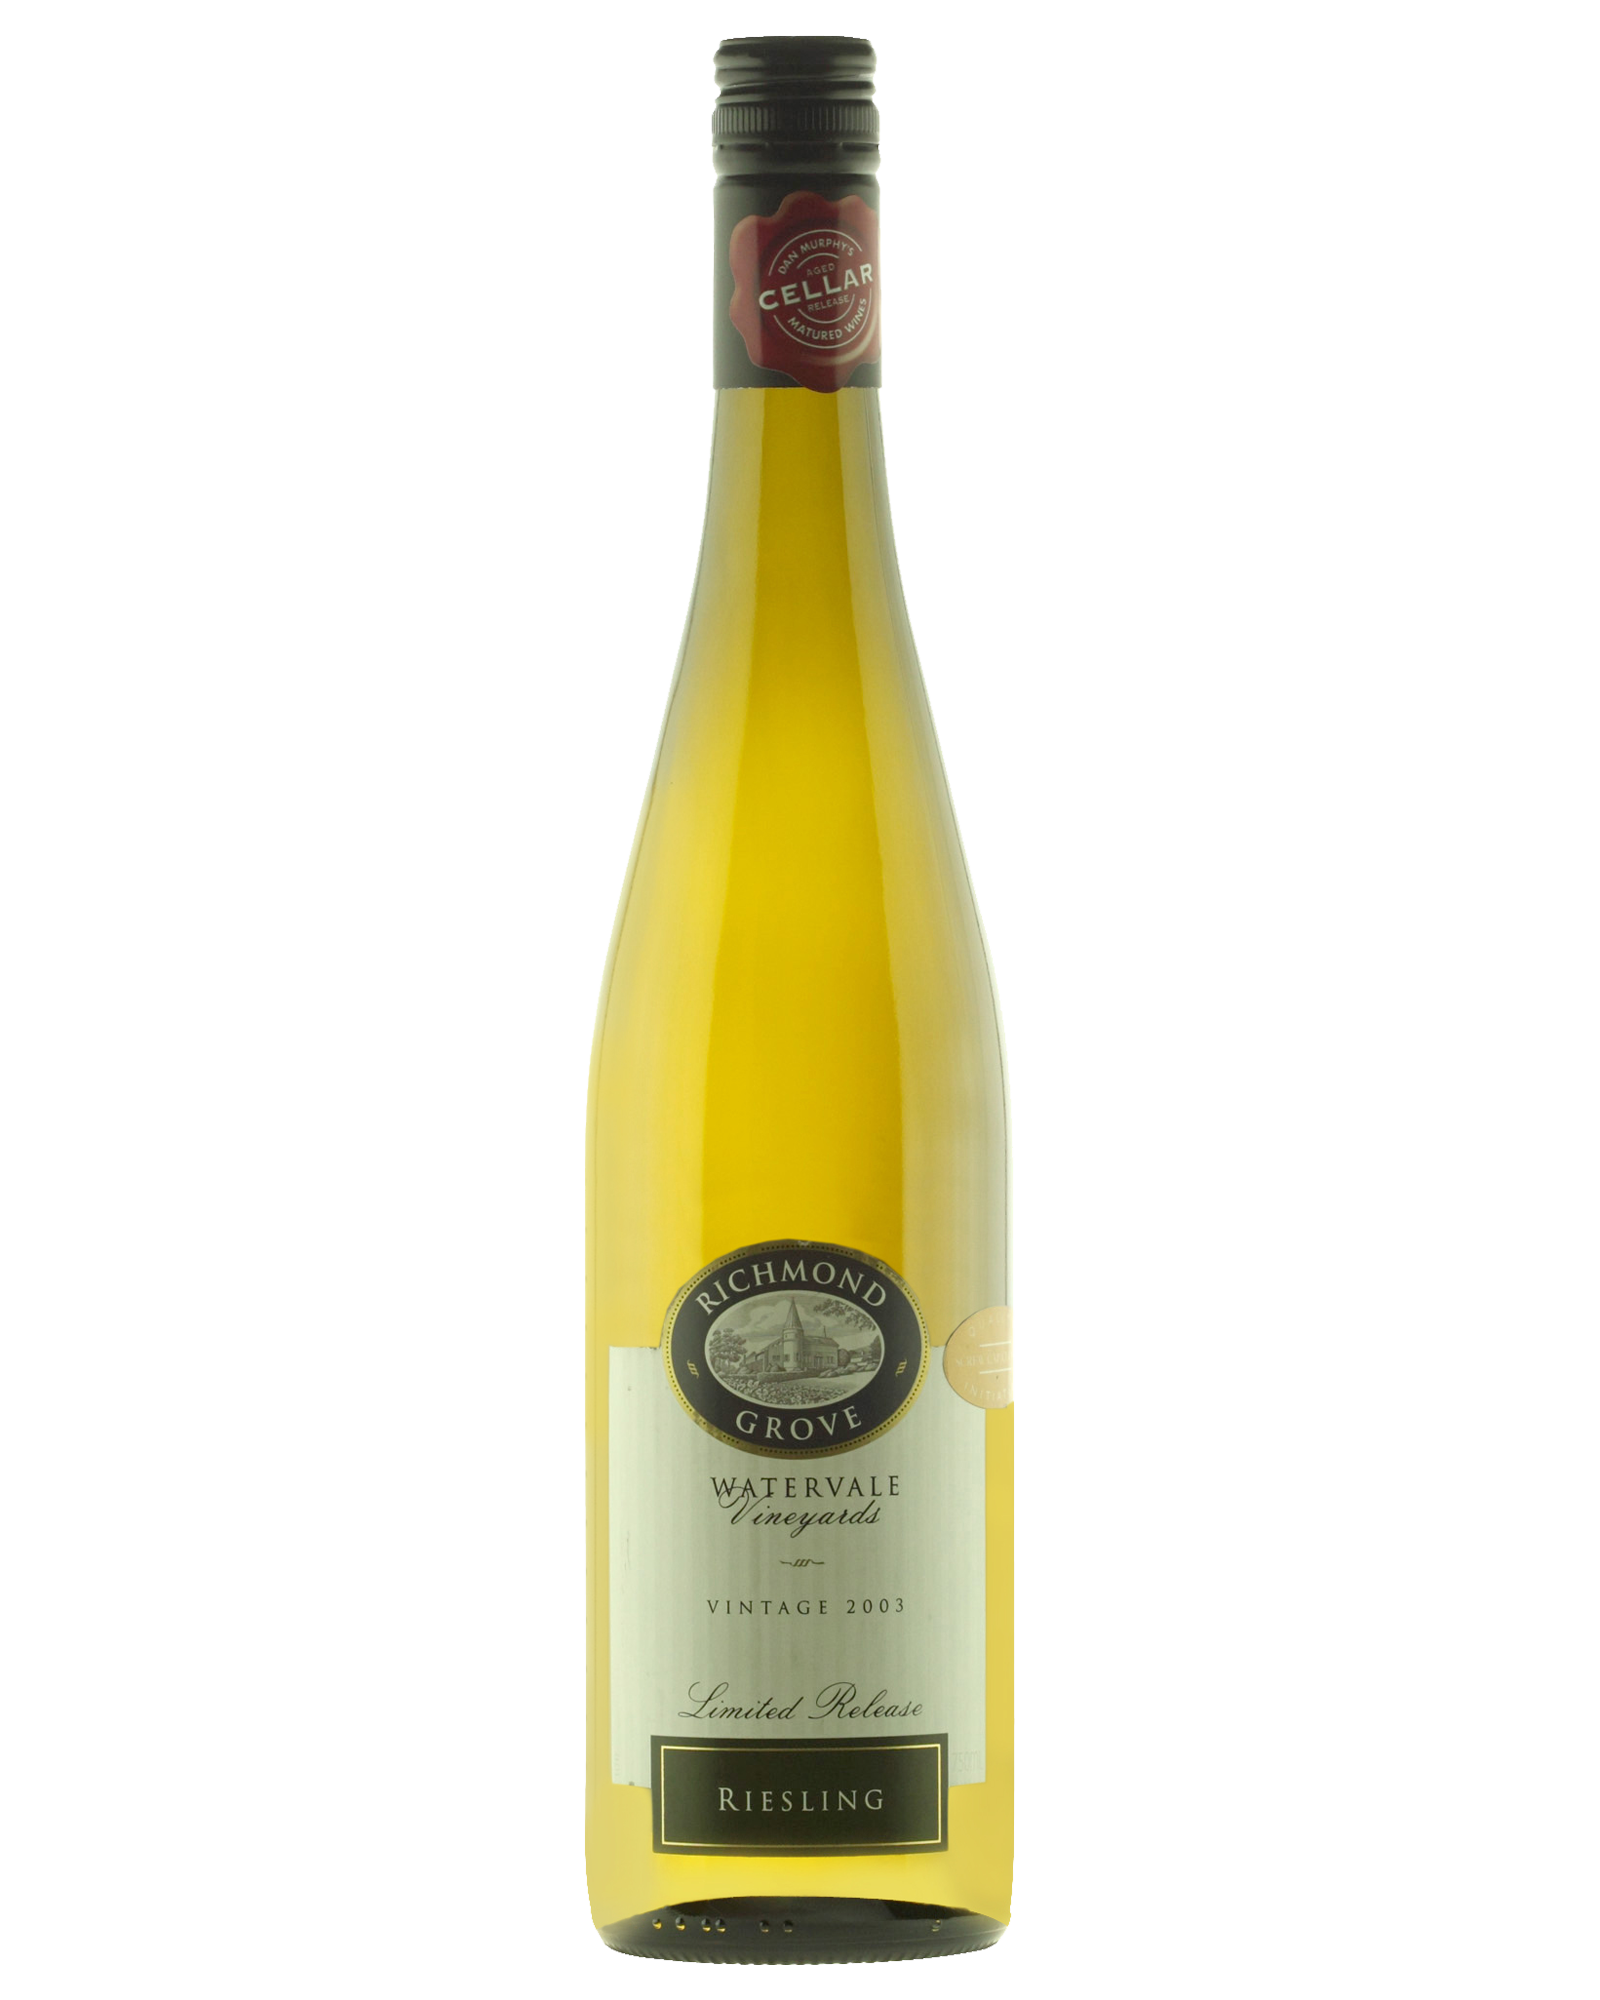 Richmond Grove Watervale Riesling 2003